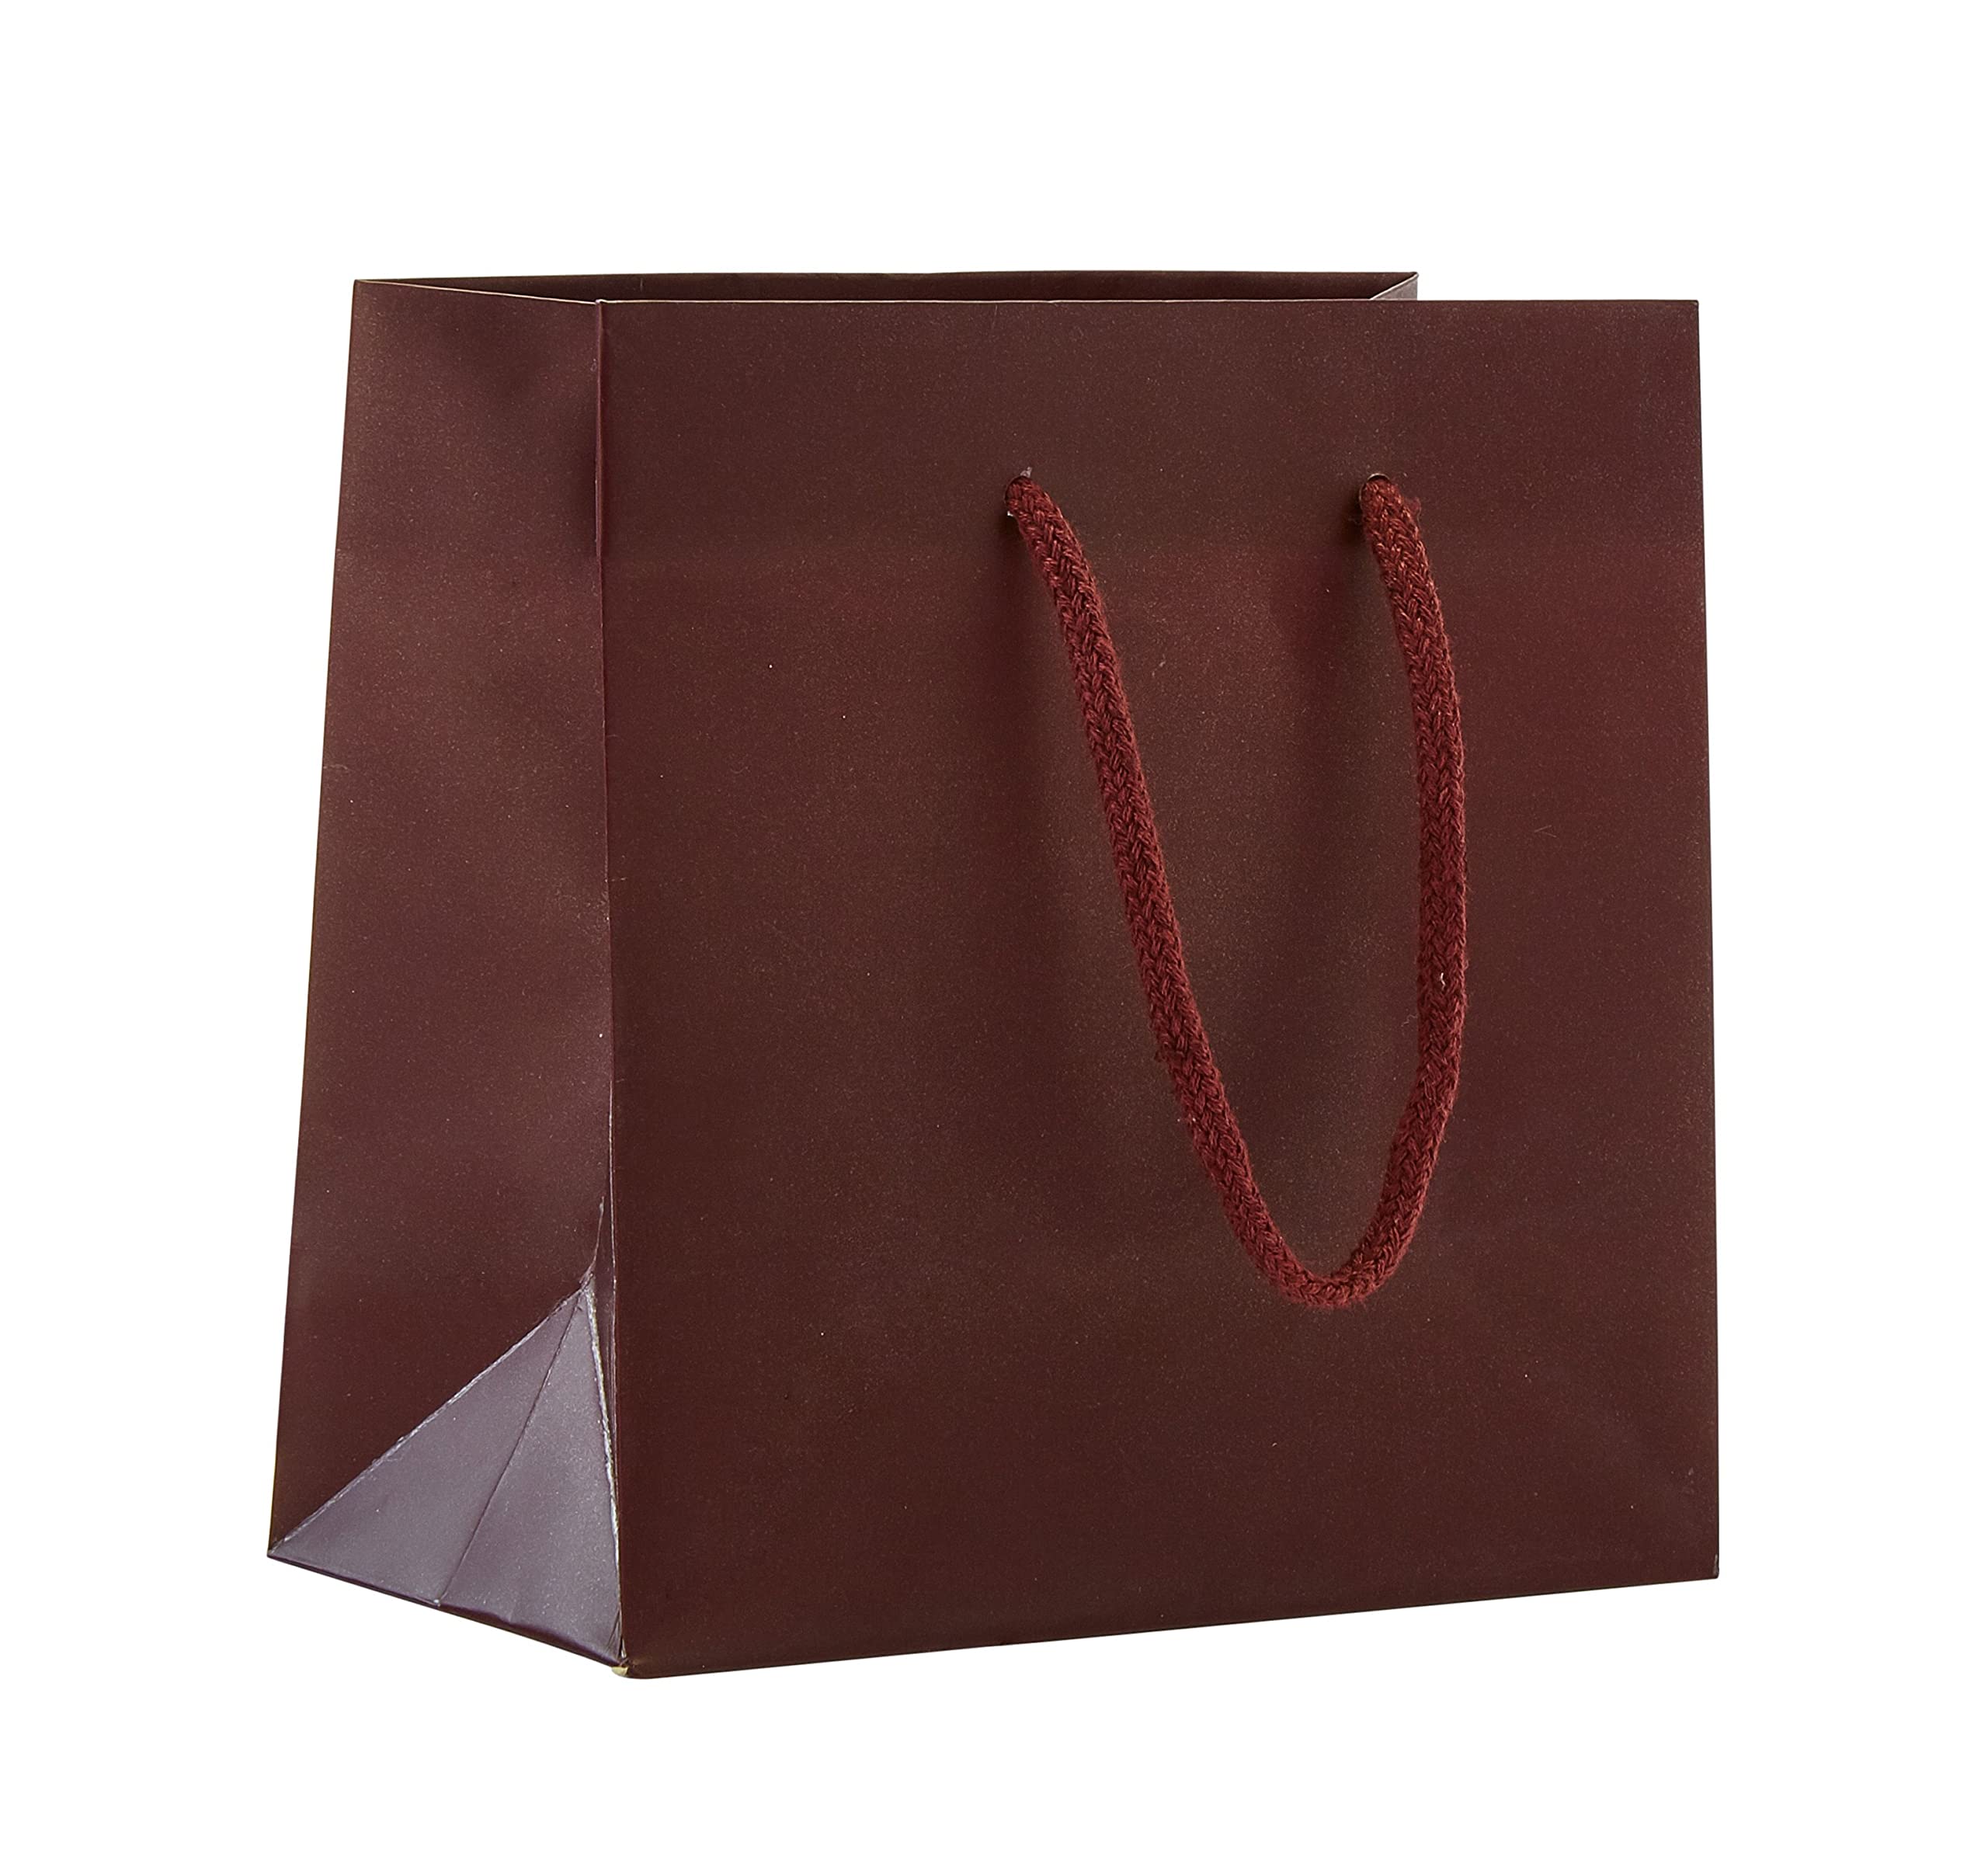 PTP BAGS Burgundy Matte 6.5" x 3.5" x 6.5" Euro Tote Bags [Pack of 100] Reusable Paper Gift Euro Tote